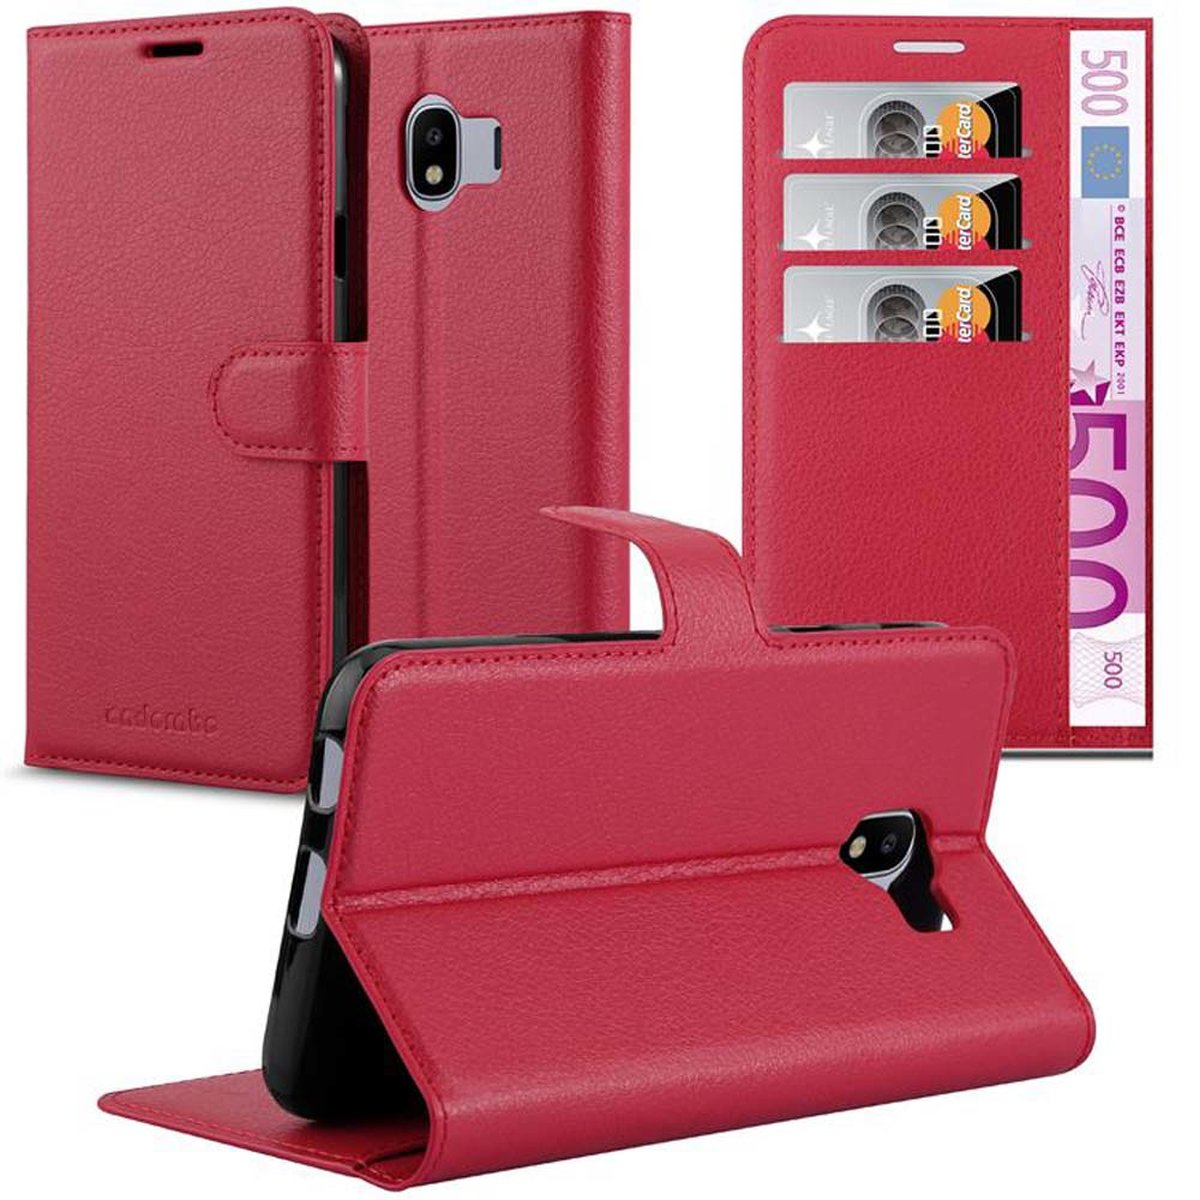 J4 KARMIN 2018, Samsung, Hülle Galaxy CADORABO Standfunktion, ROT Bookcover, Book